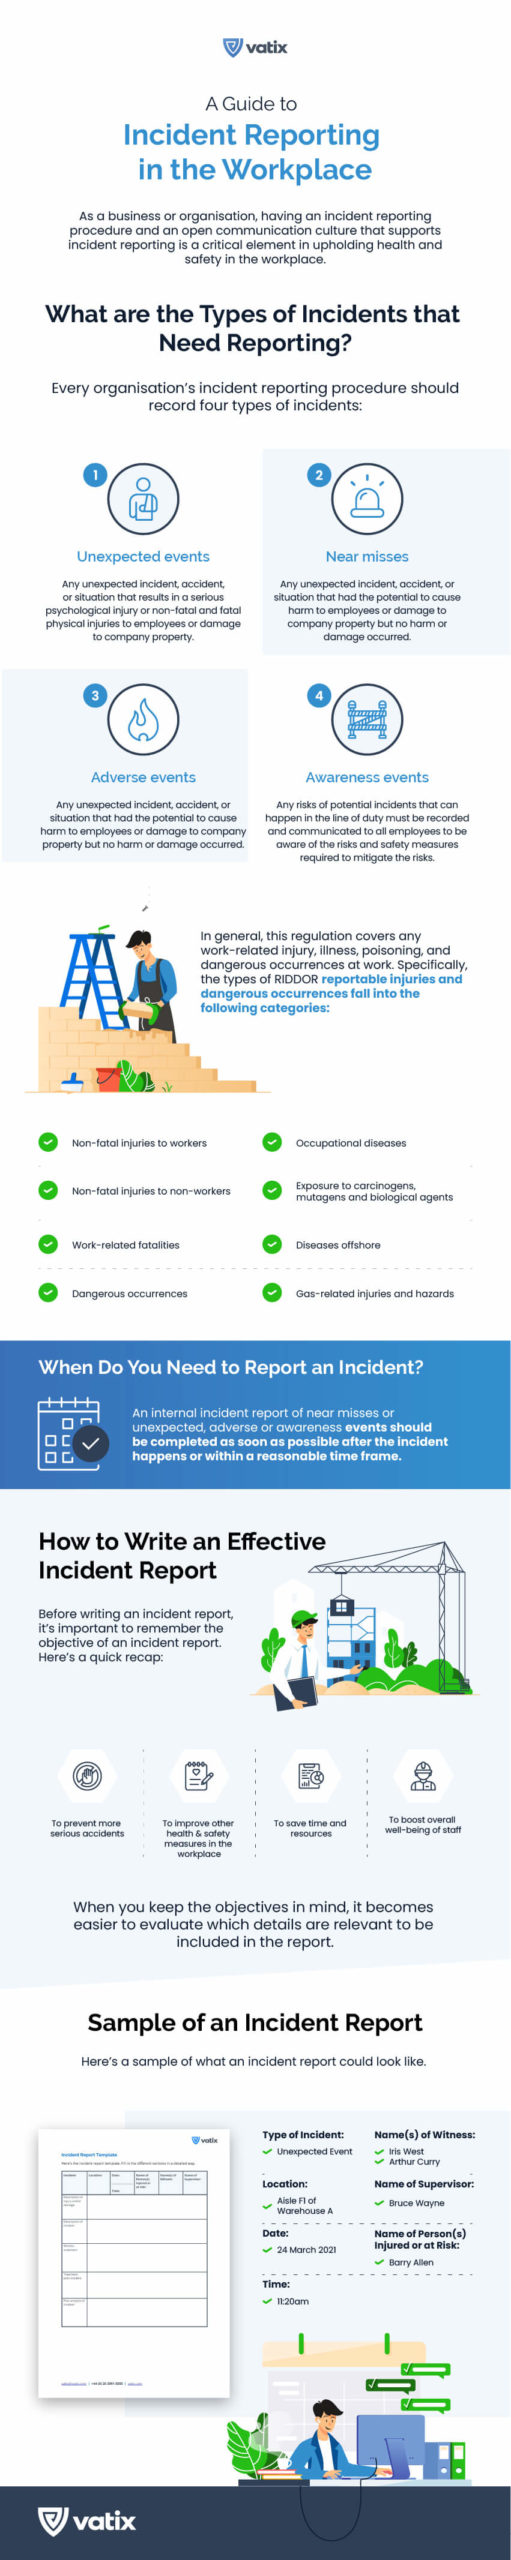 Incident Reporting